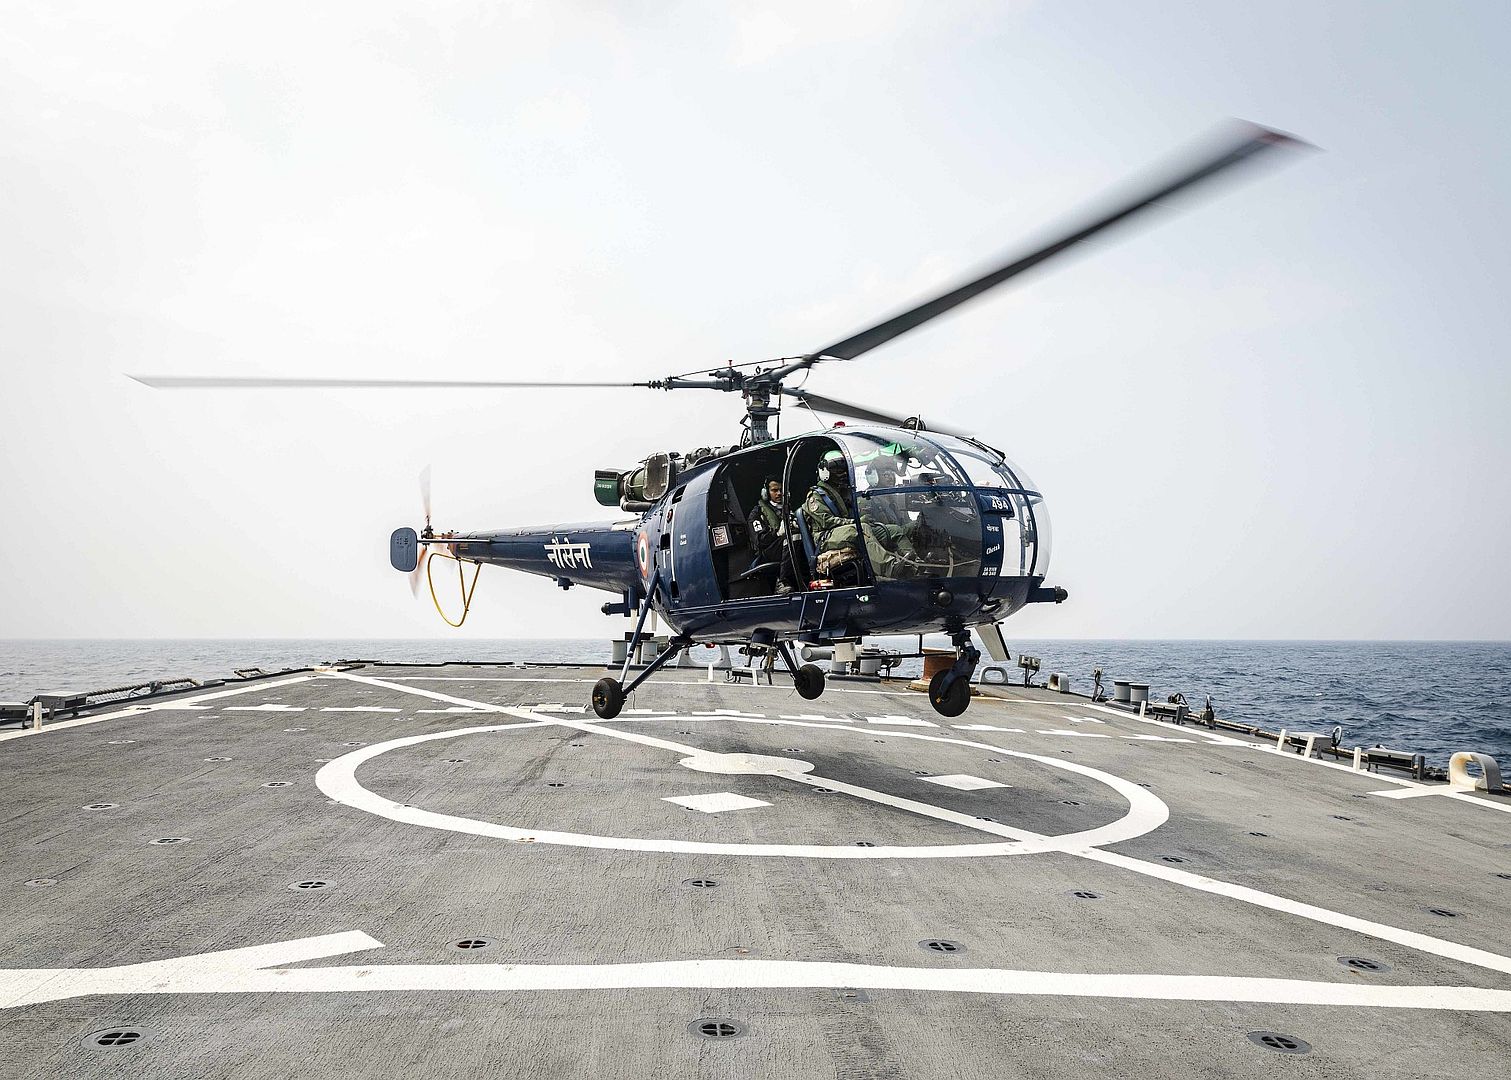 Chetak Helicopter From The Indian Navy Rajput Class Guided Missile Destroyer INS Ranjivay